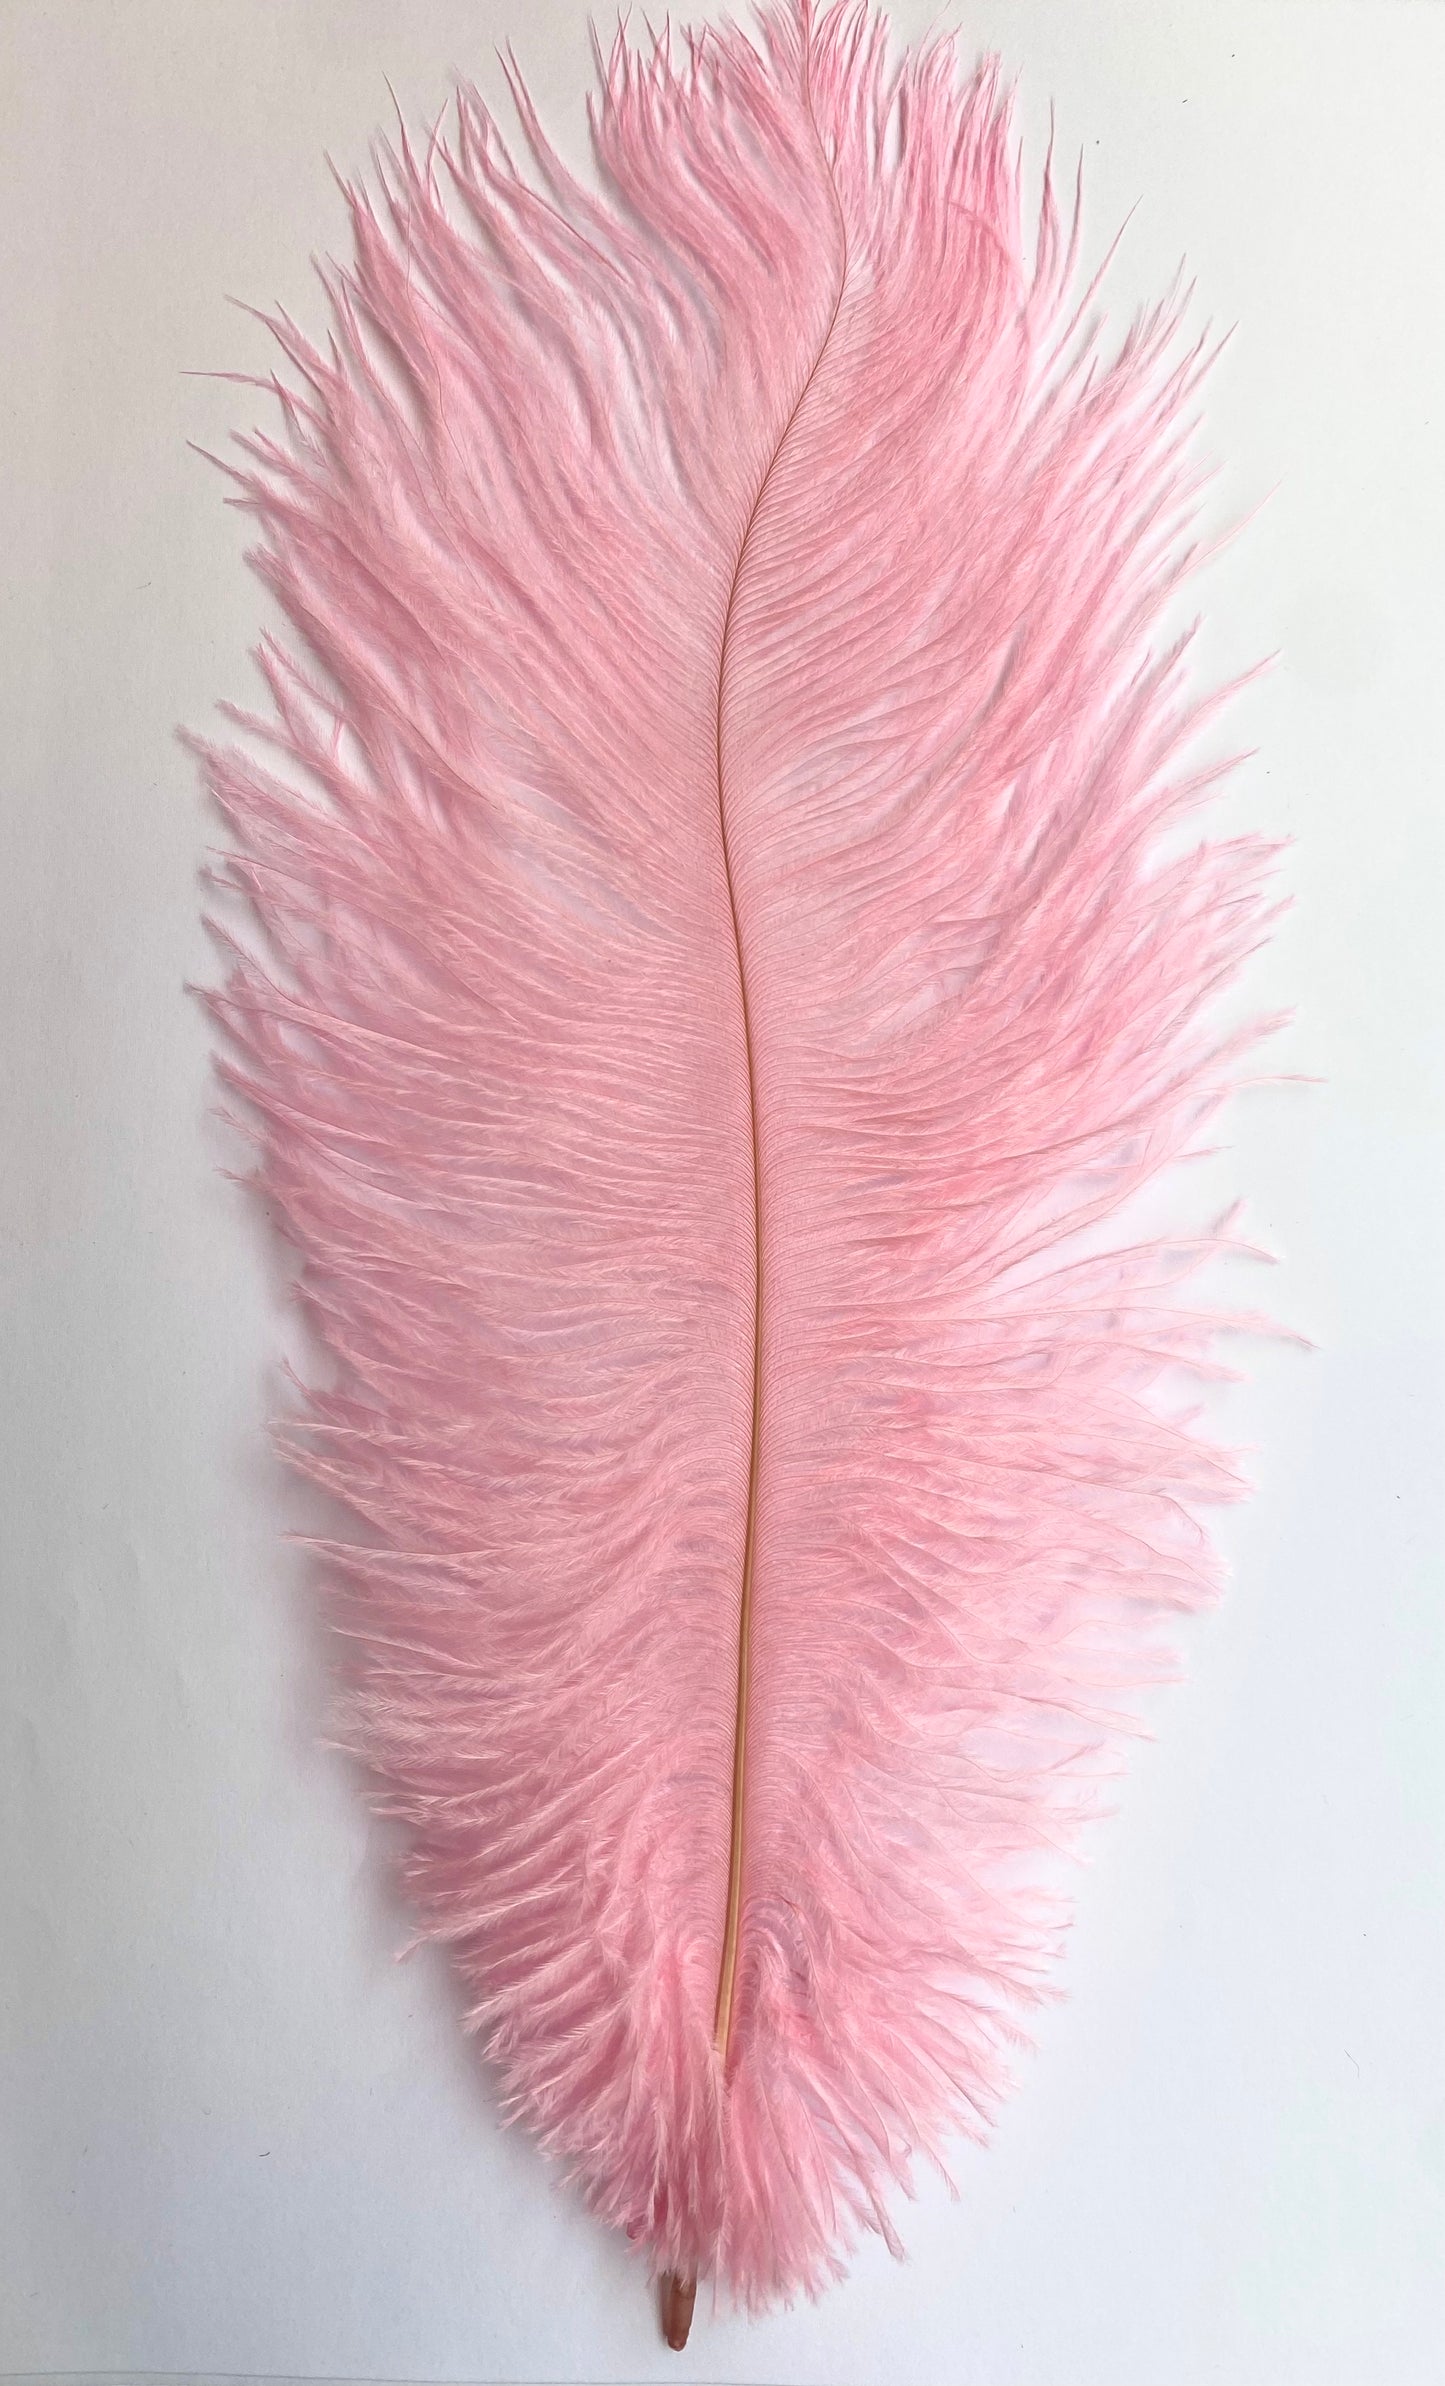 Pink ostrich feathers